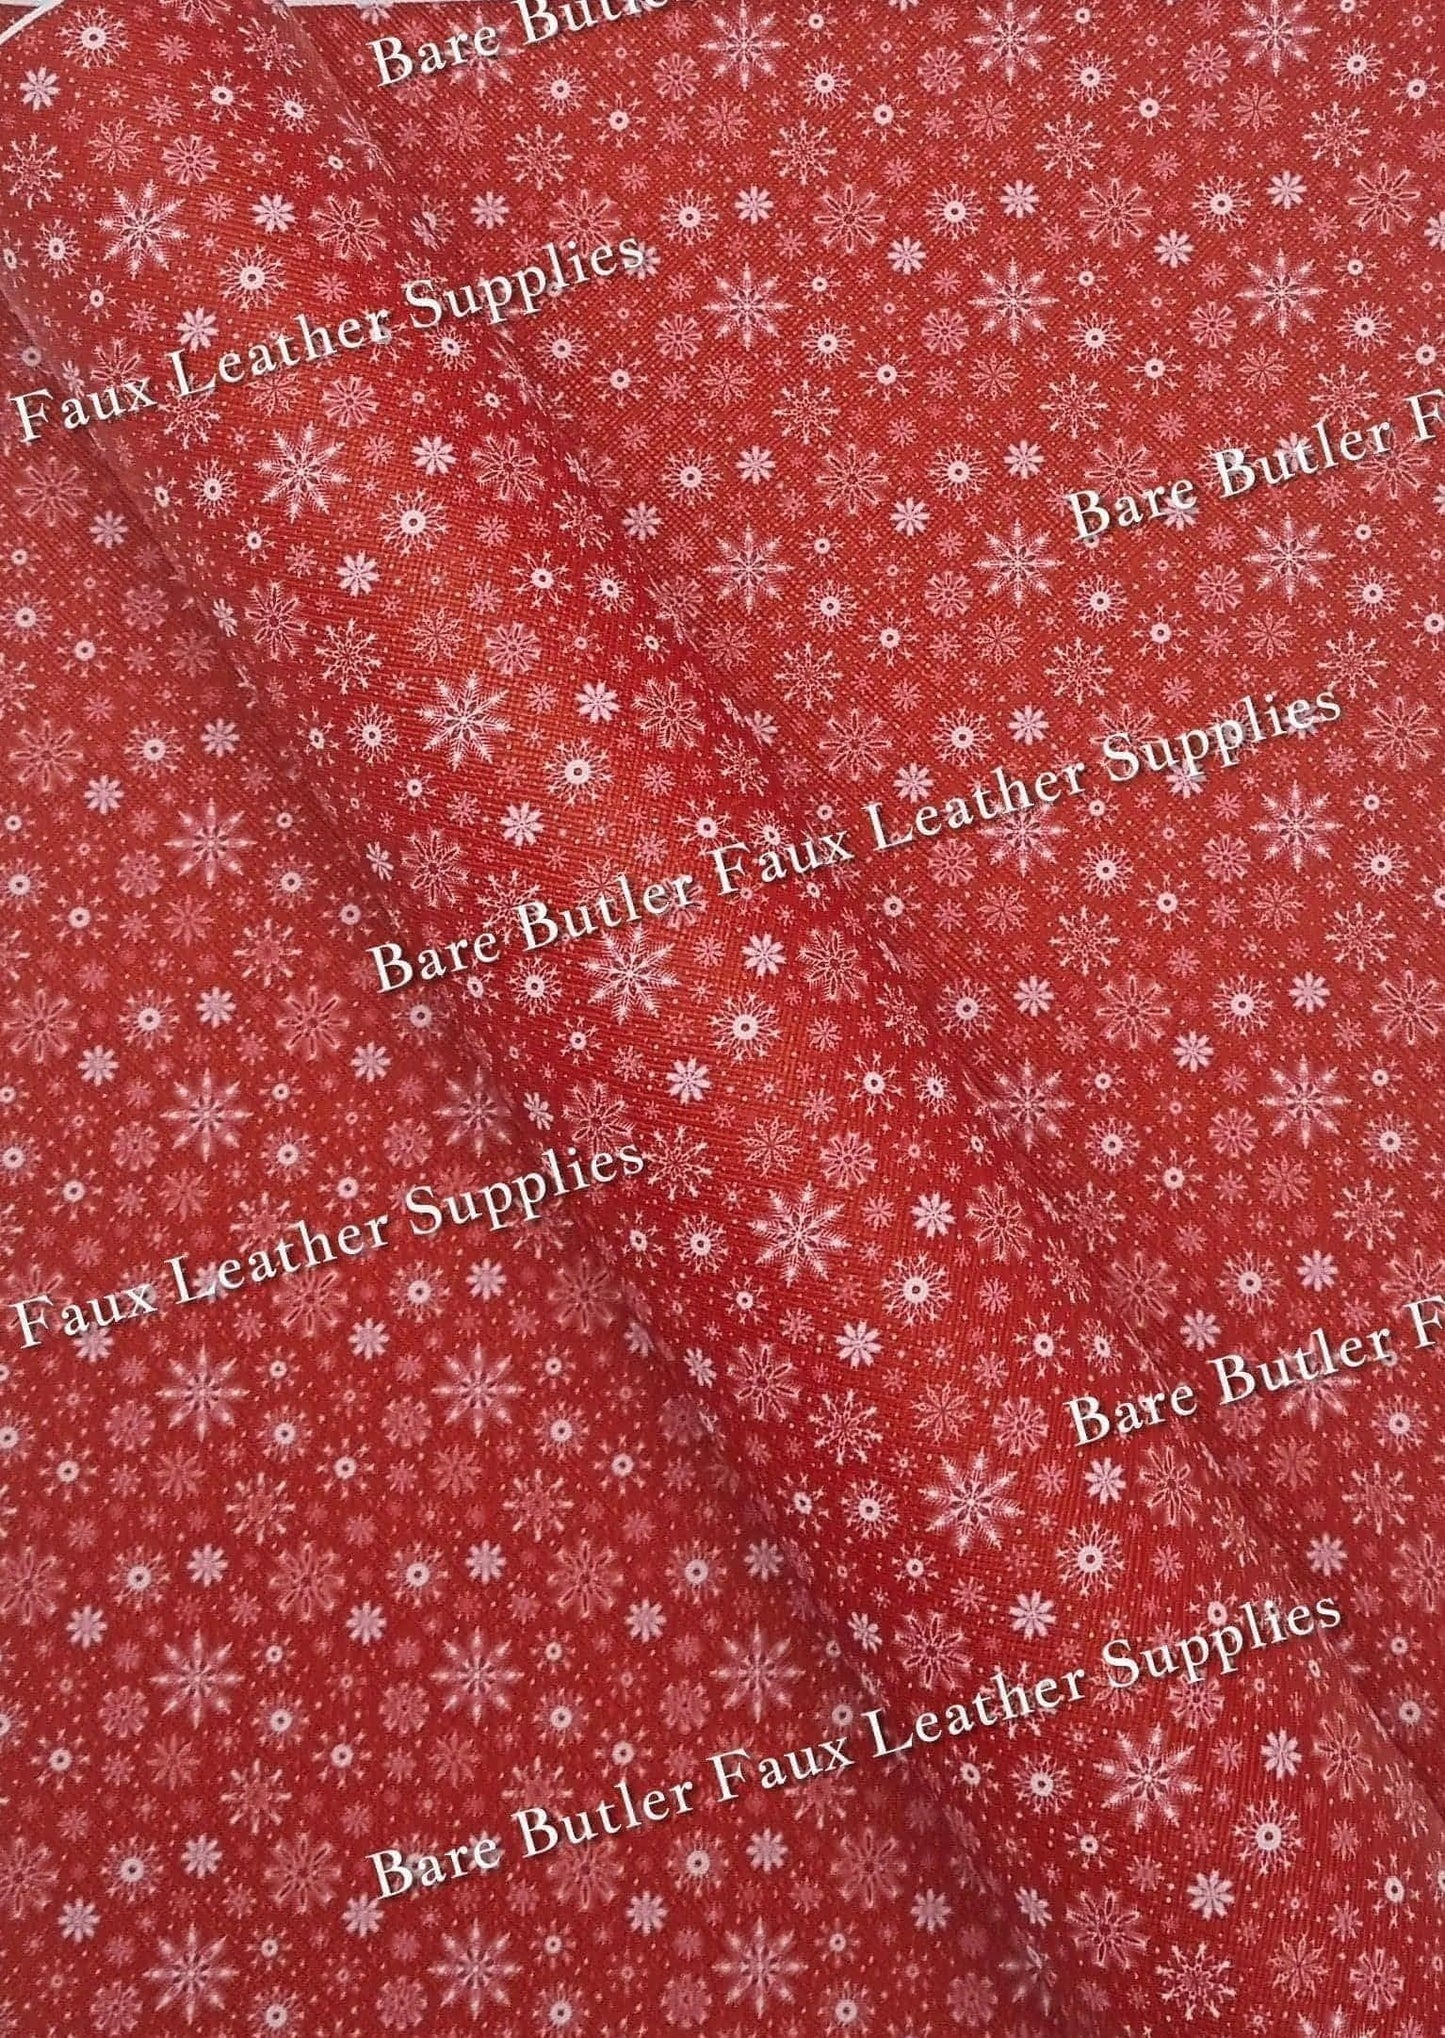 Snowflakes Red Faux Leather - christmas, Faux, Faux Leather, Gnome, Gnomes, ho ho ho, Leather, leatherette, Litchi, Red, santa, snowflake, Snowflakes - Bare Butler Faux Leather Supplies 